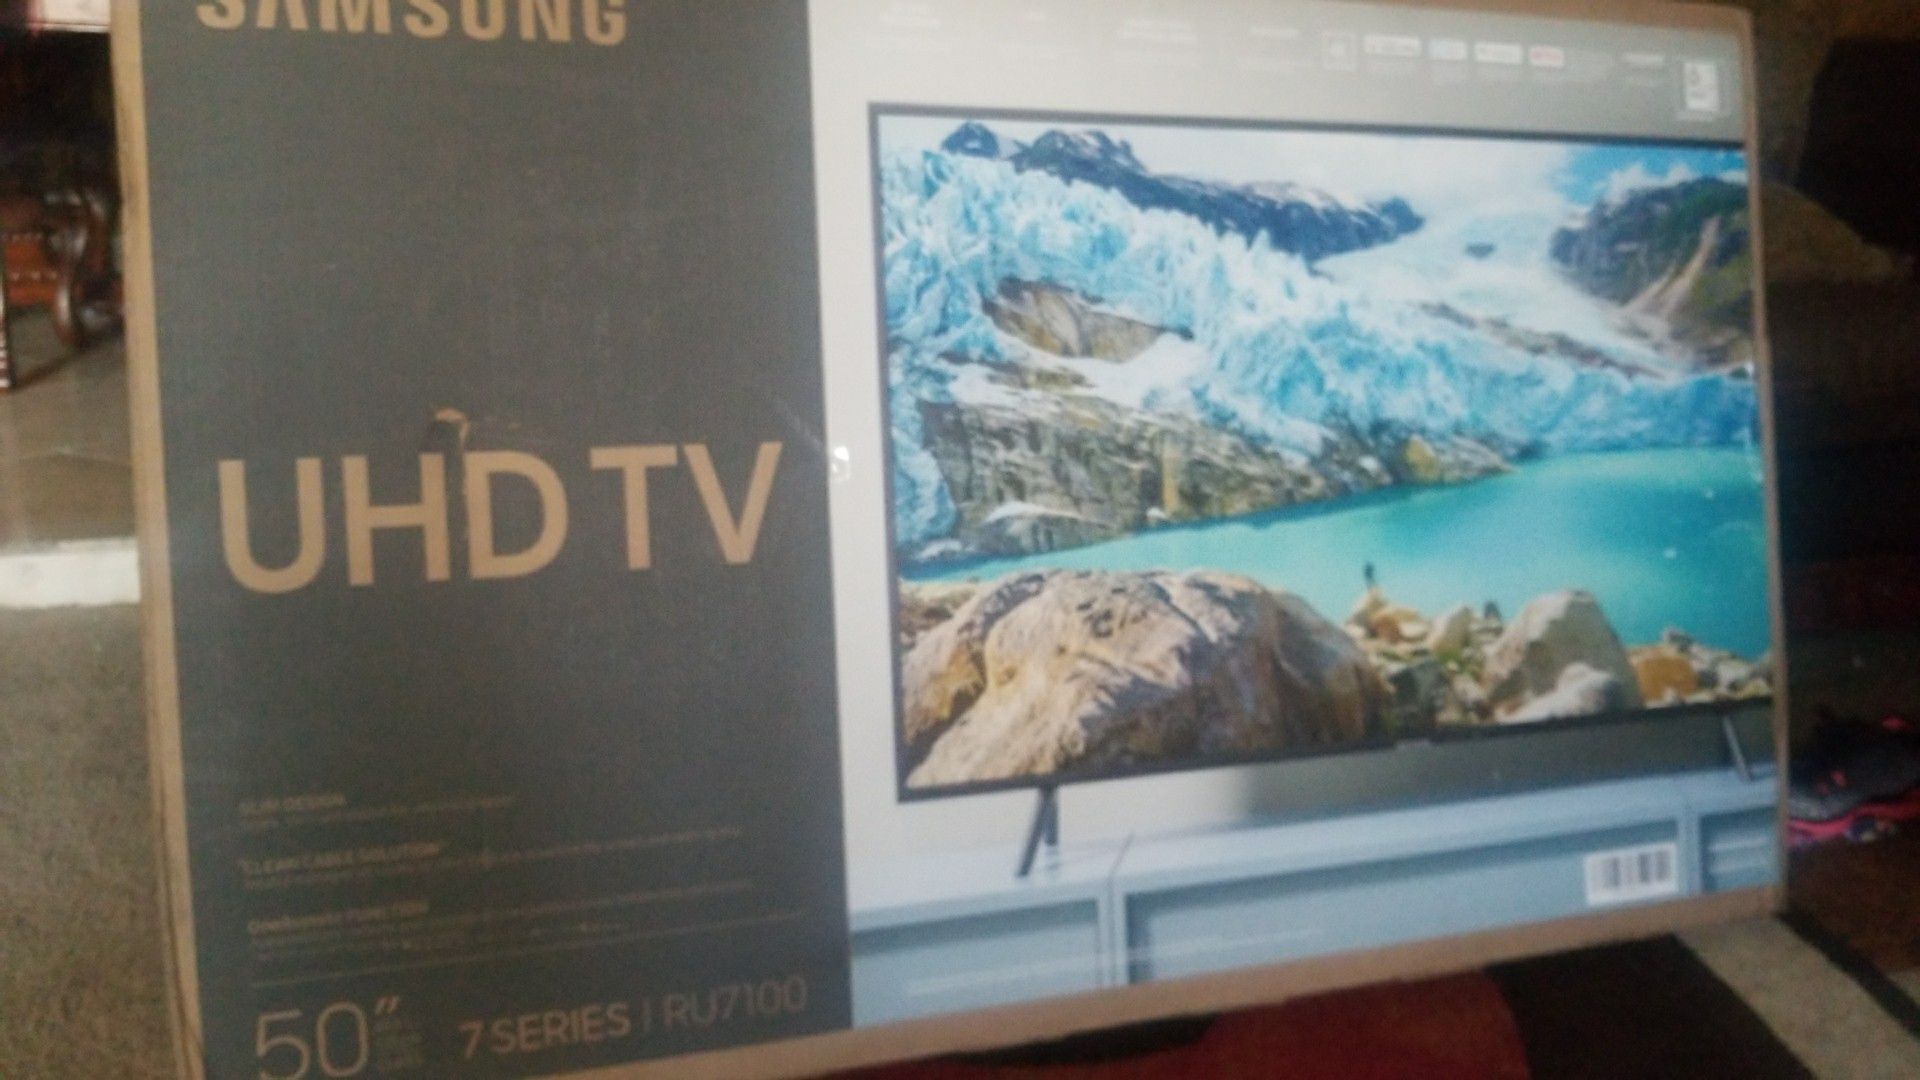 Samsung 50 inch smart 4k tv 7 series New in the open box